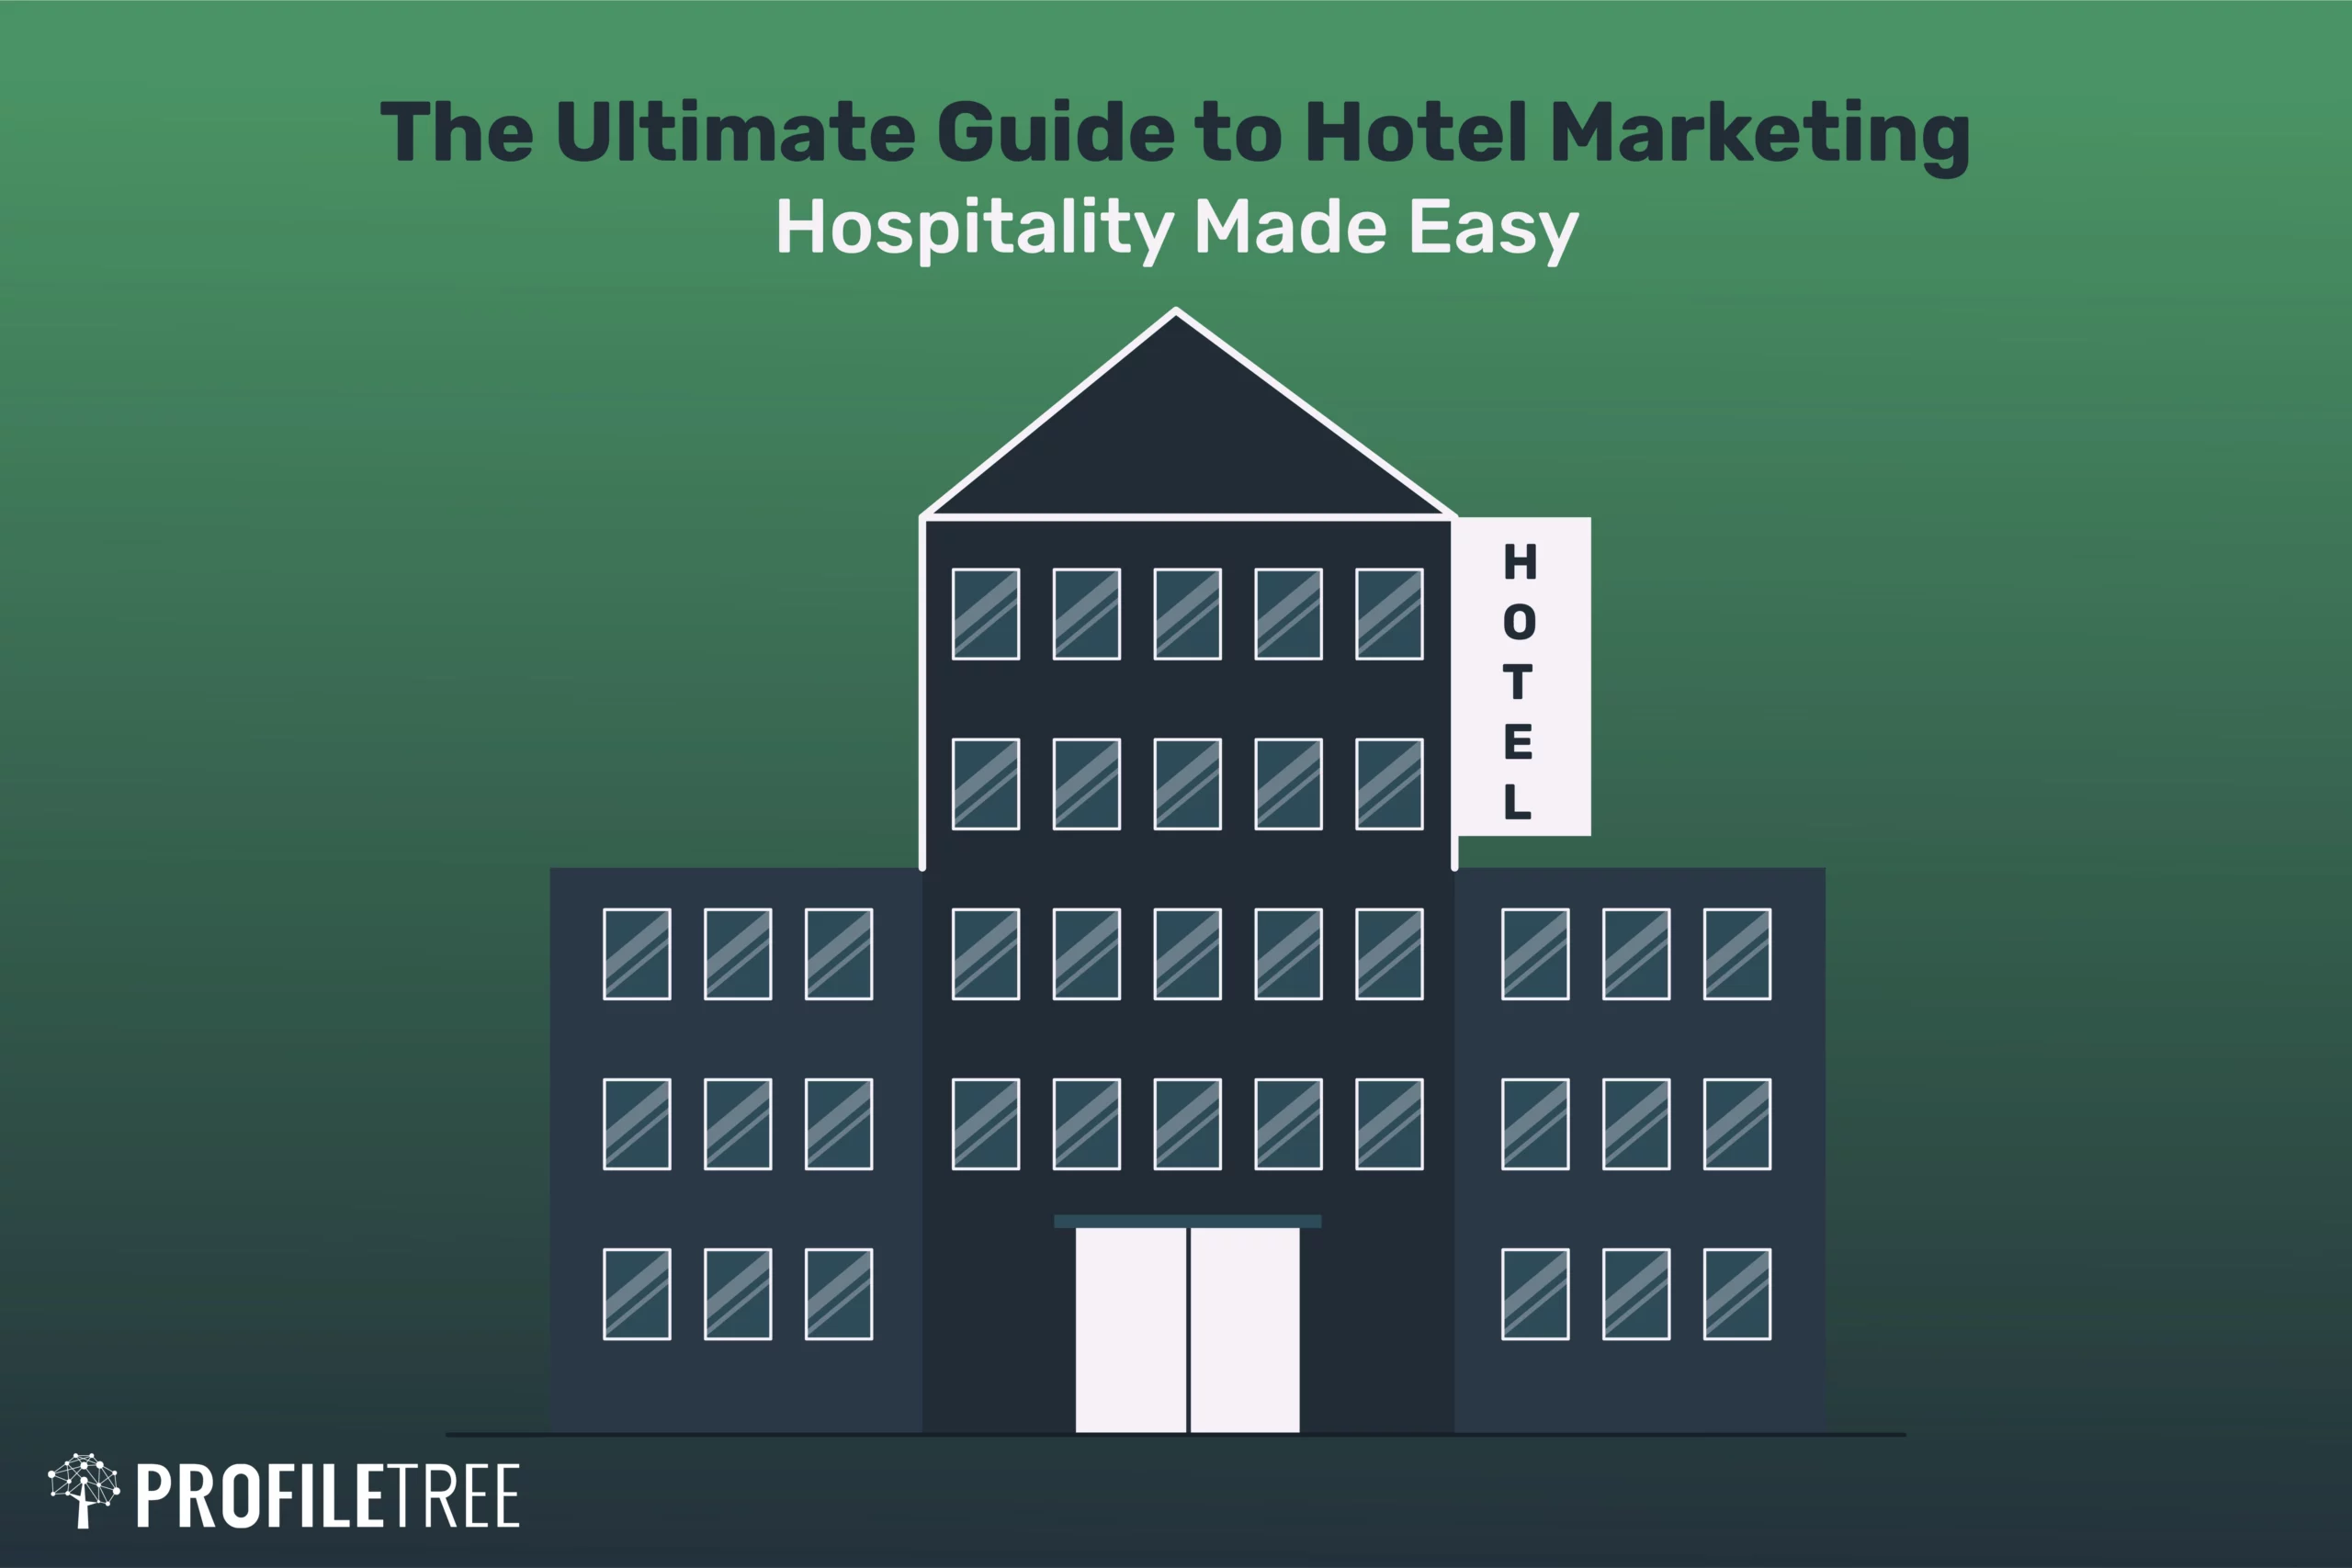 The Ultimate Guide to Hotel Marketing - Hospitality Made Easy